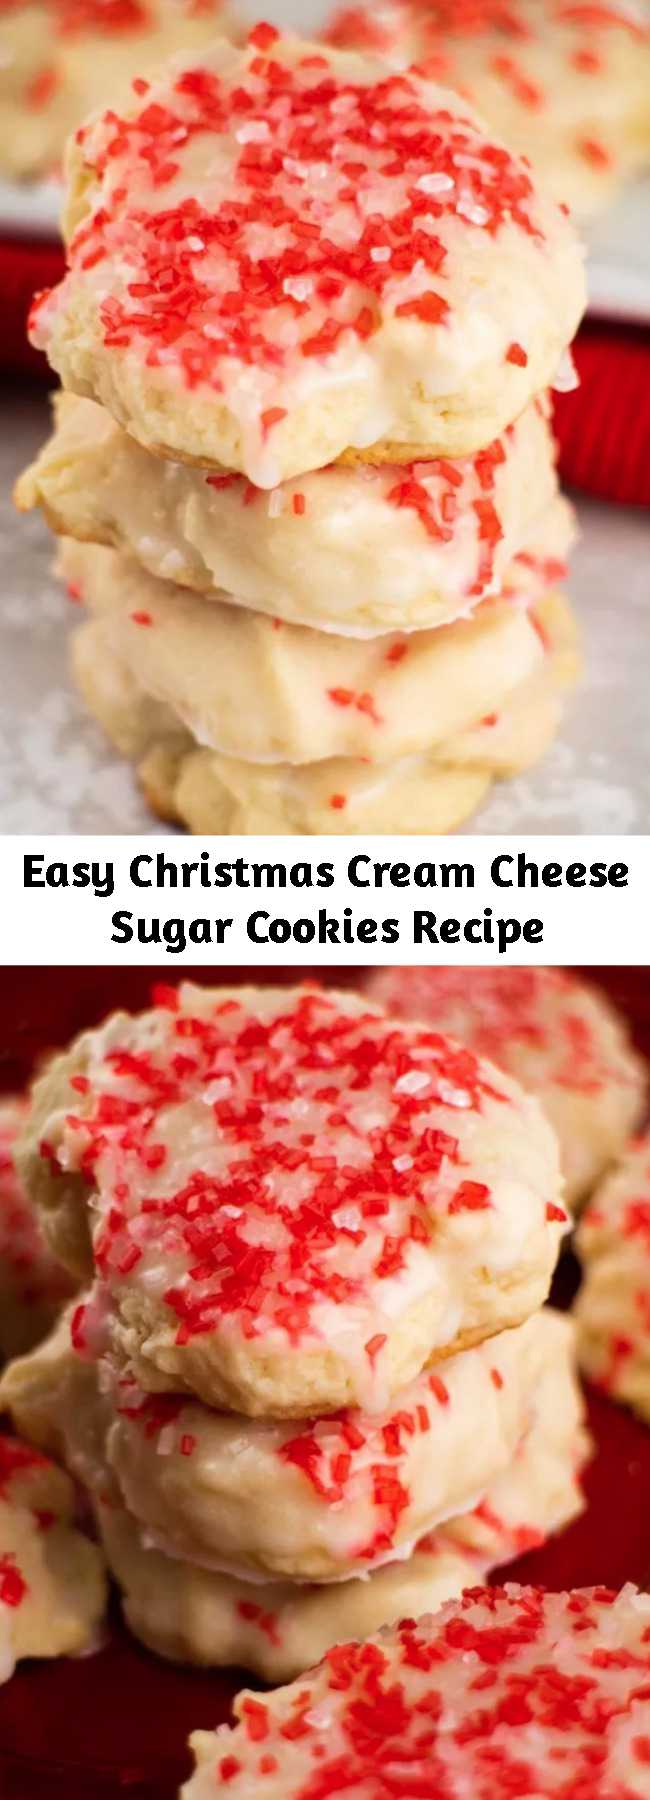 Easy Christmas Cream Cheese Sugar Cookies Recipe - CREAM CHEESE Christmas Sugar Cookies! These easy to make holiday cookies are so soft because they're made with cream cheese! Dip each cookie into vanilla sugar glaze and top with red and white sprinkles!